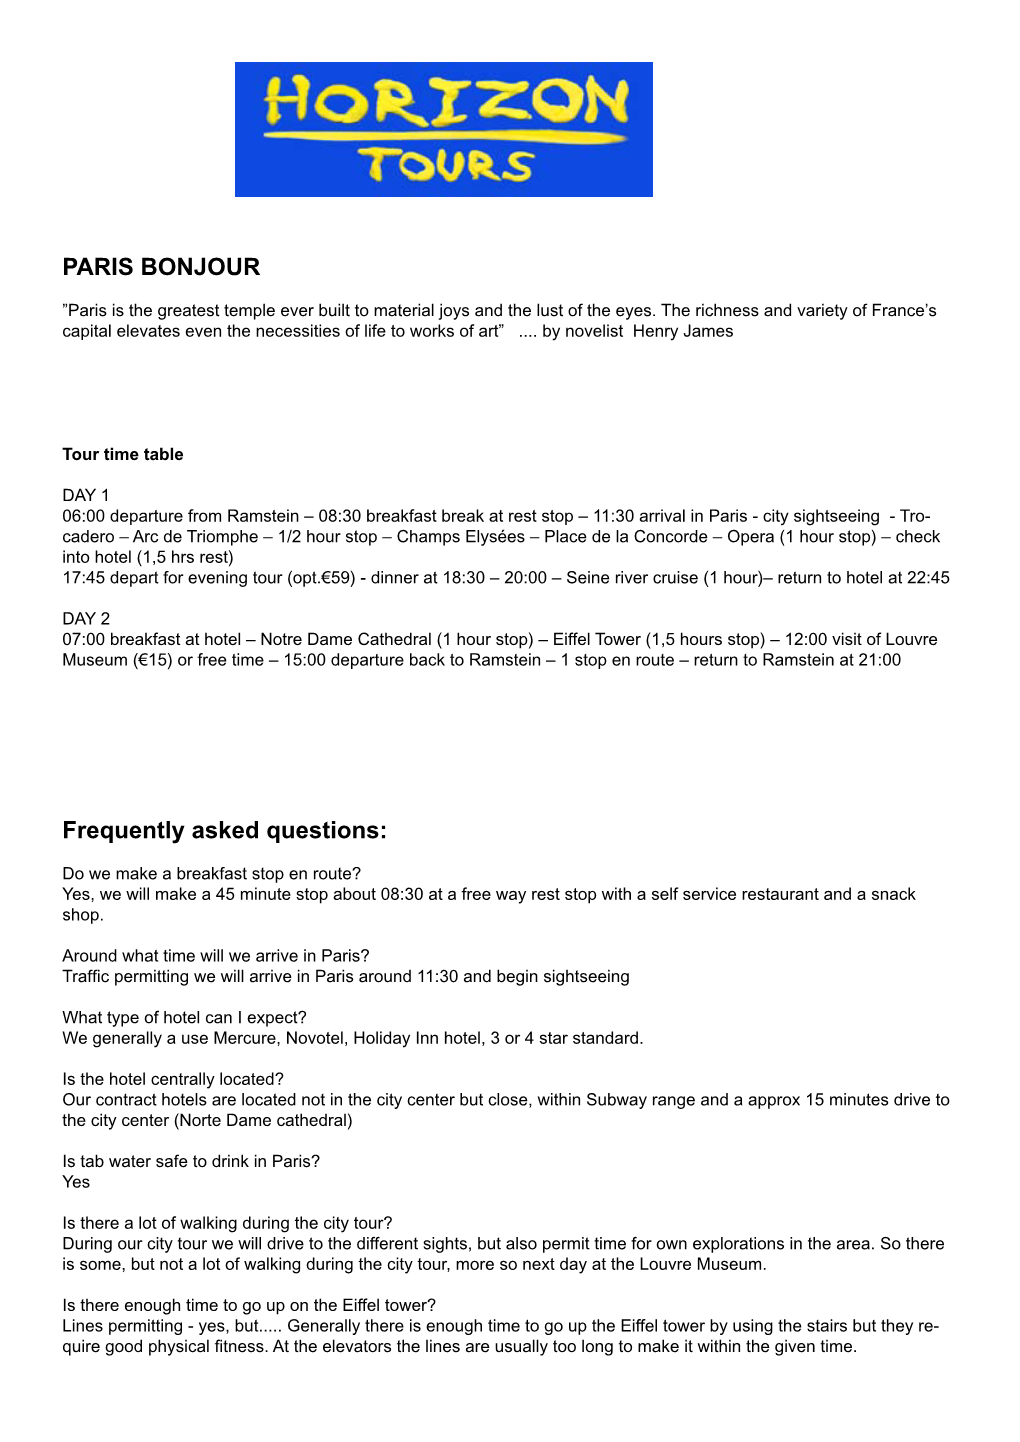 PARIS BONJOUR Frequently Asked Questions